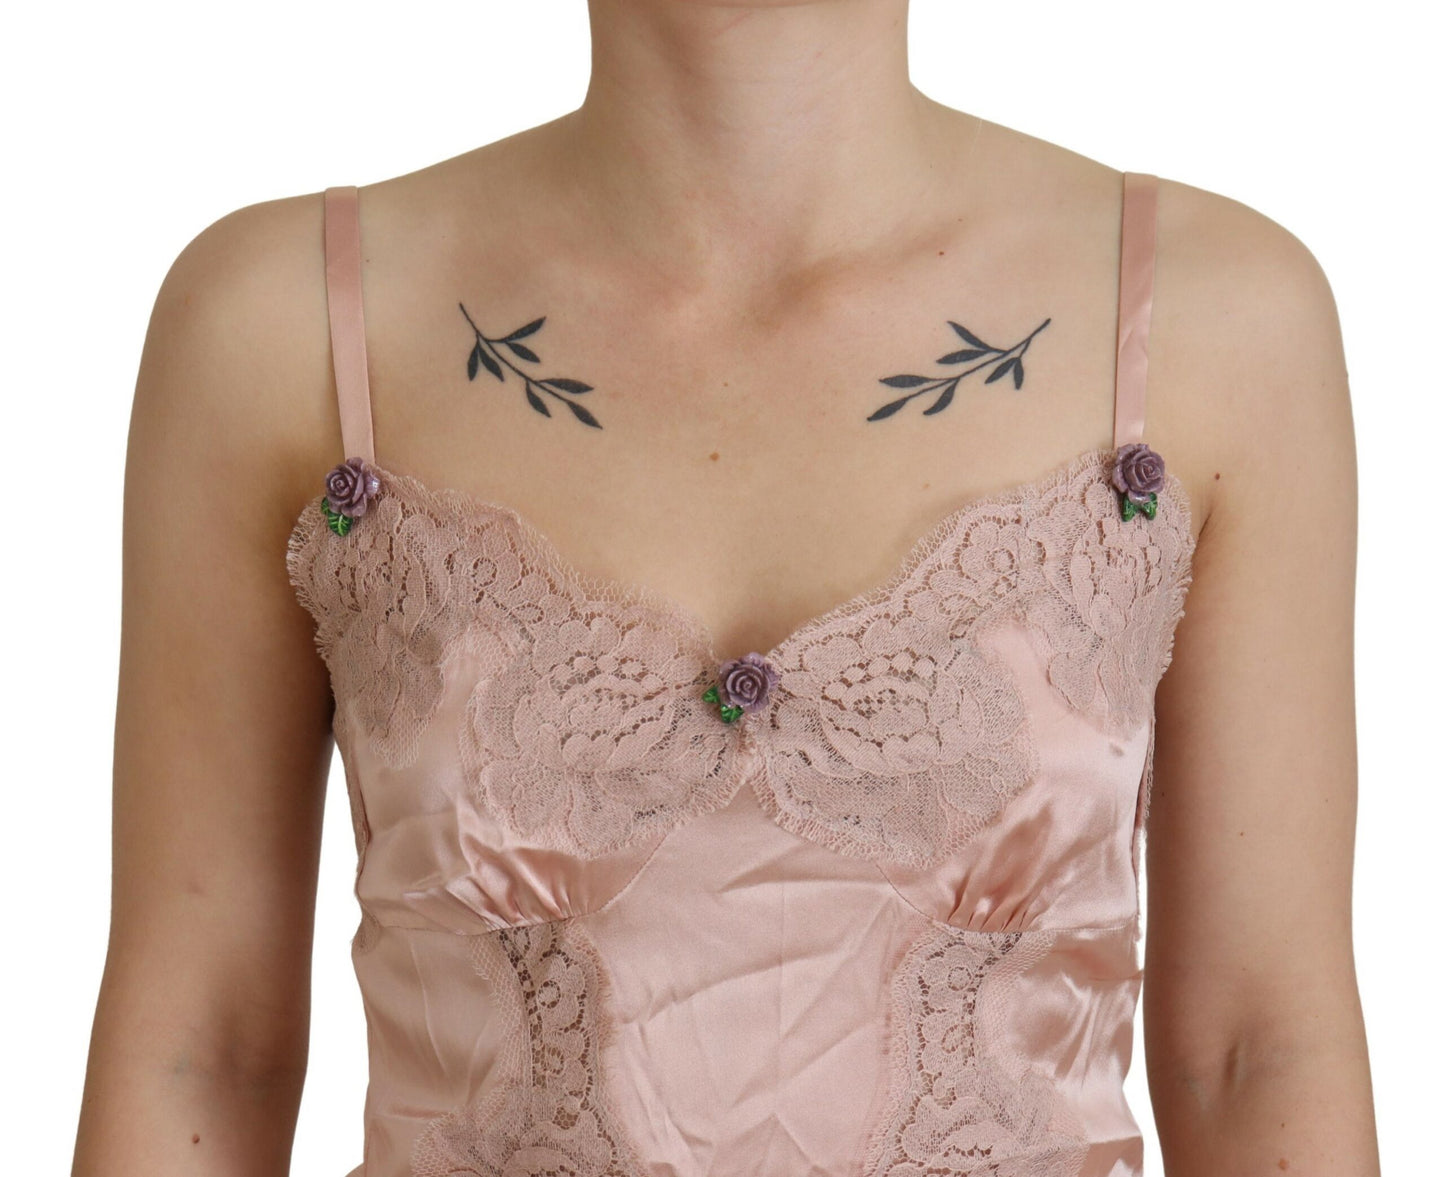 Dolce & Gabbana Pink Satin Lace Roses Tank Top Lingerie